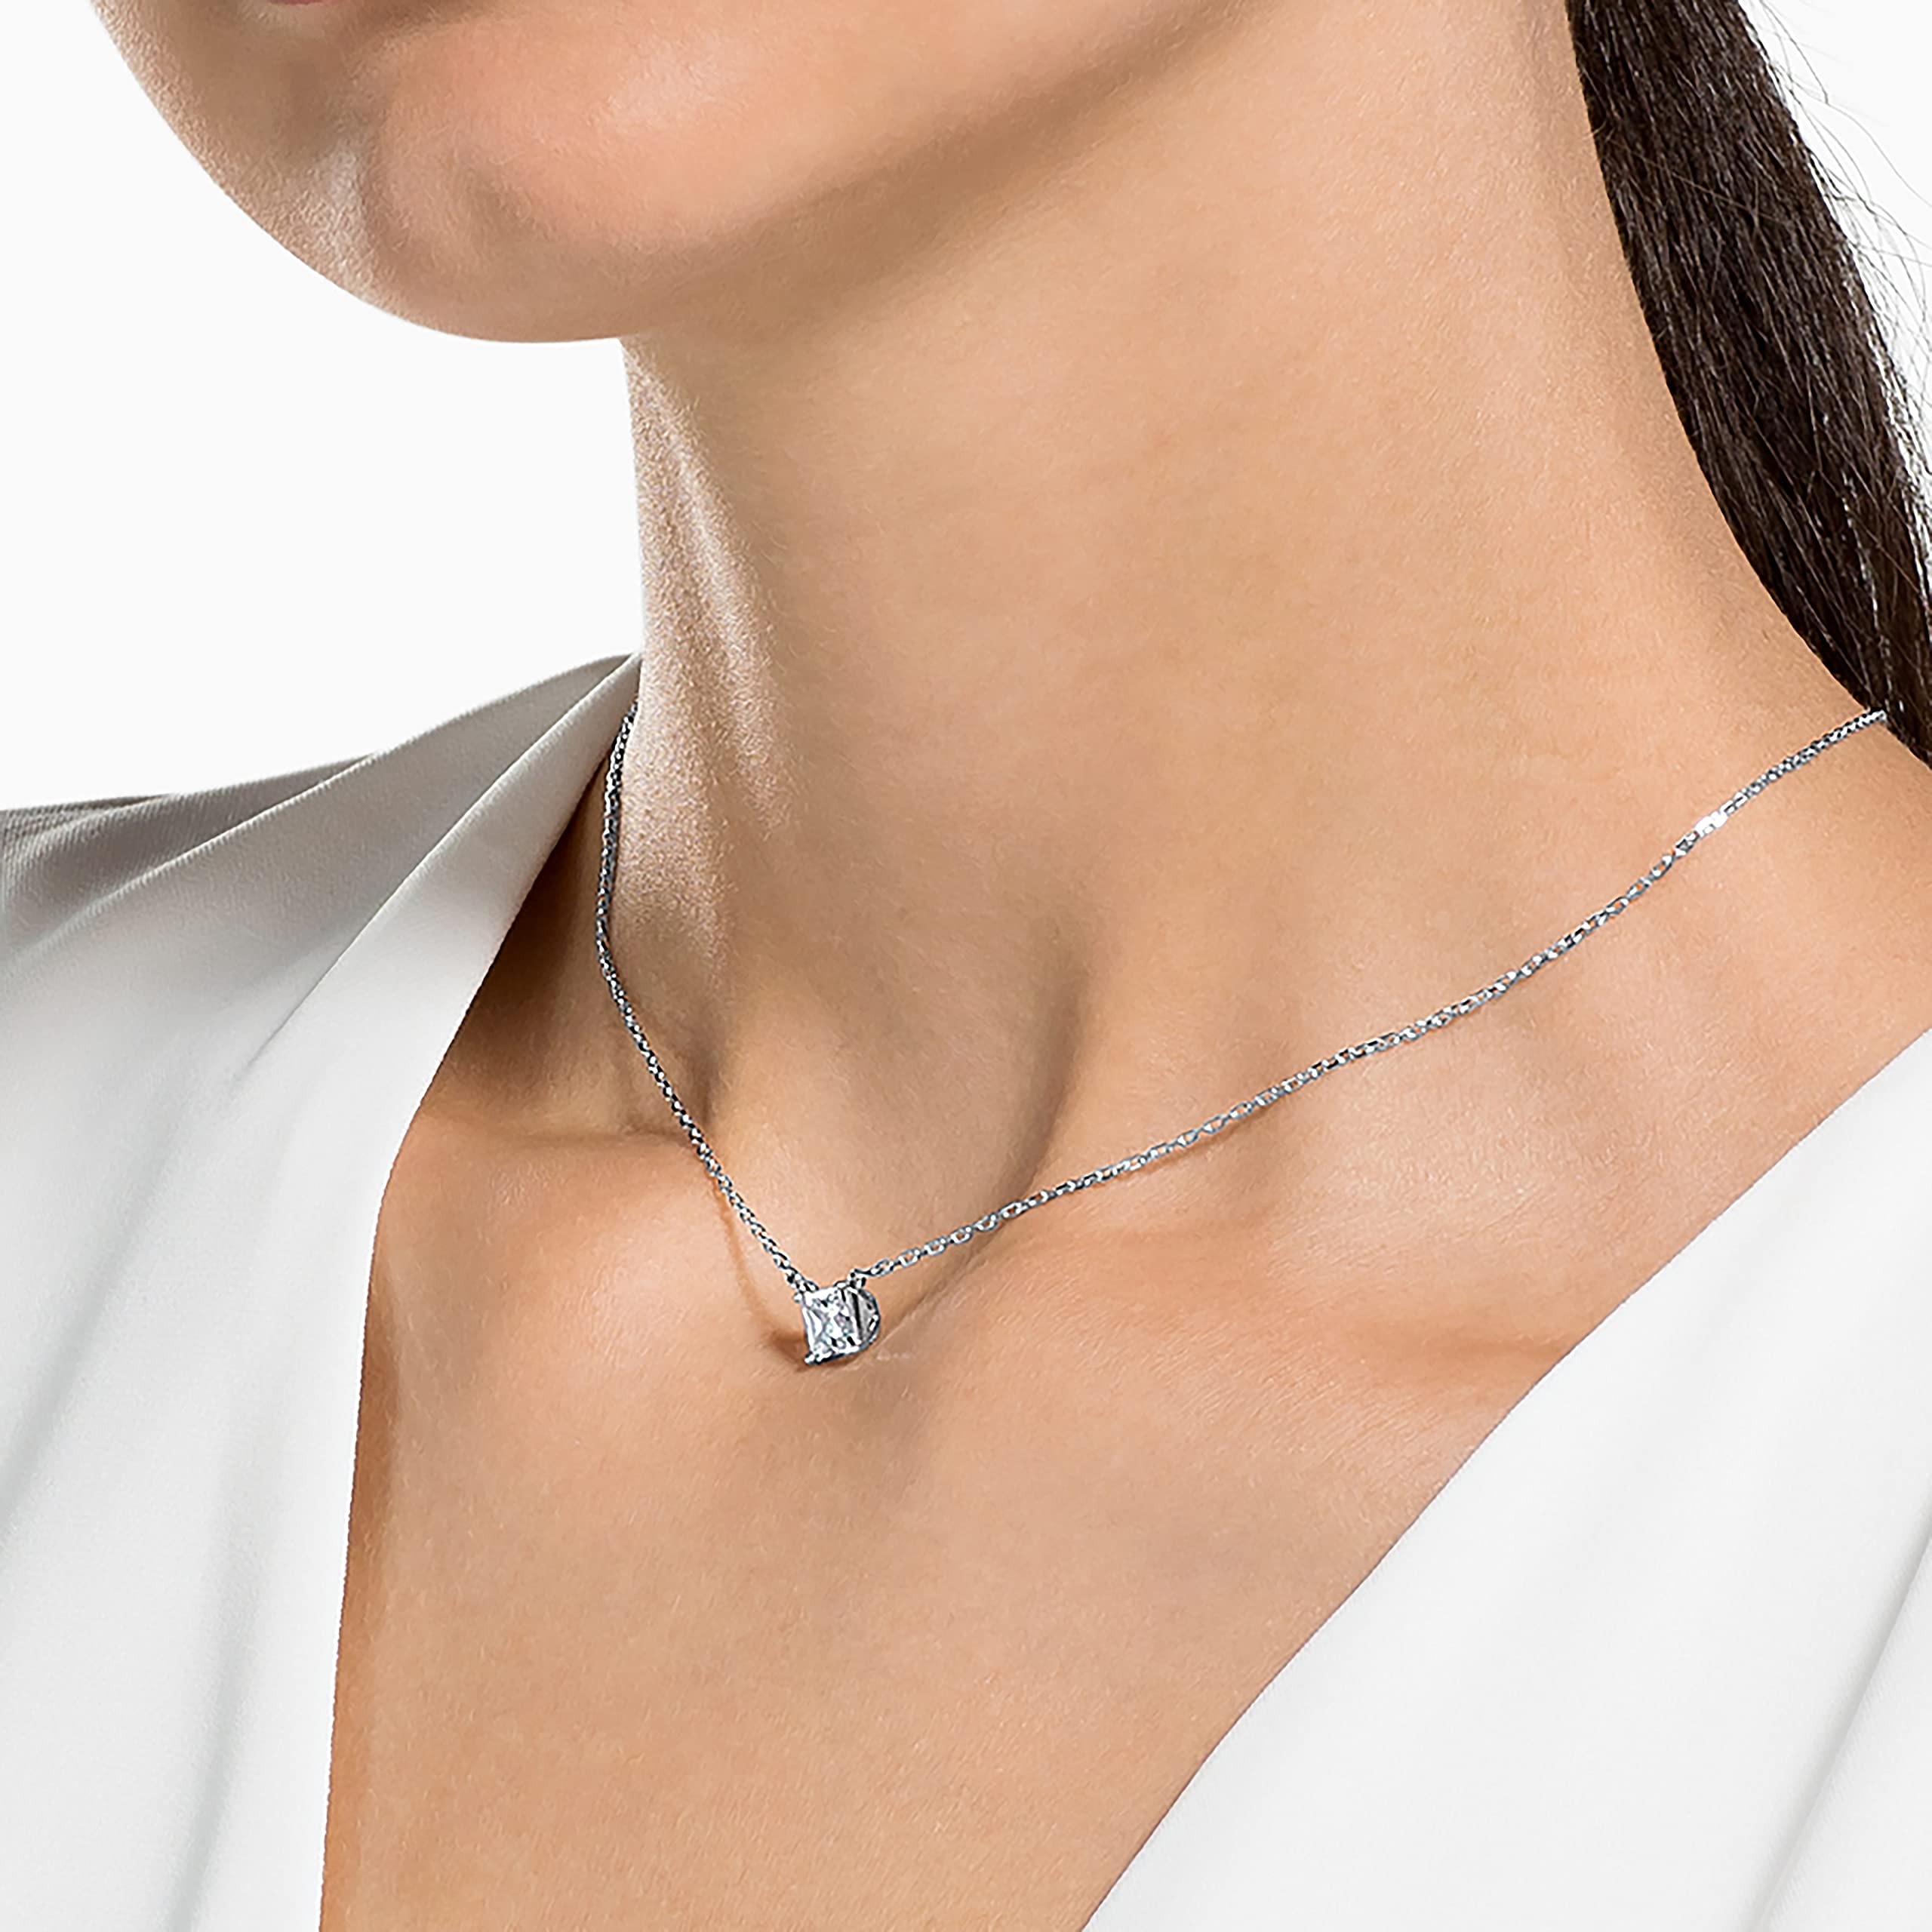 Swarovski Attract Crystal Necklace and Earrings Jewelry Collection